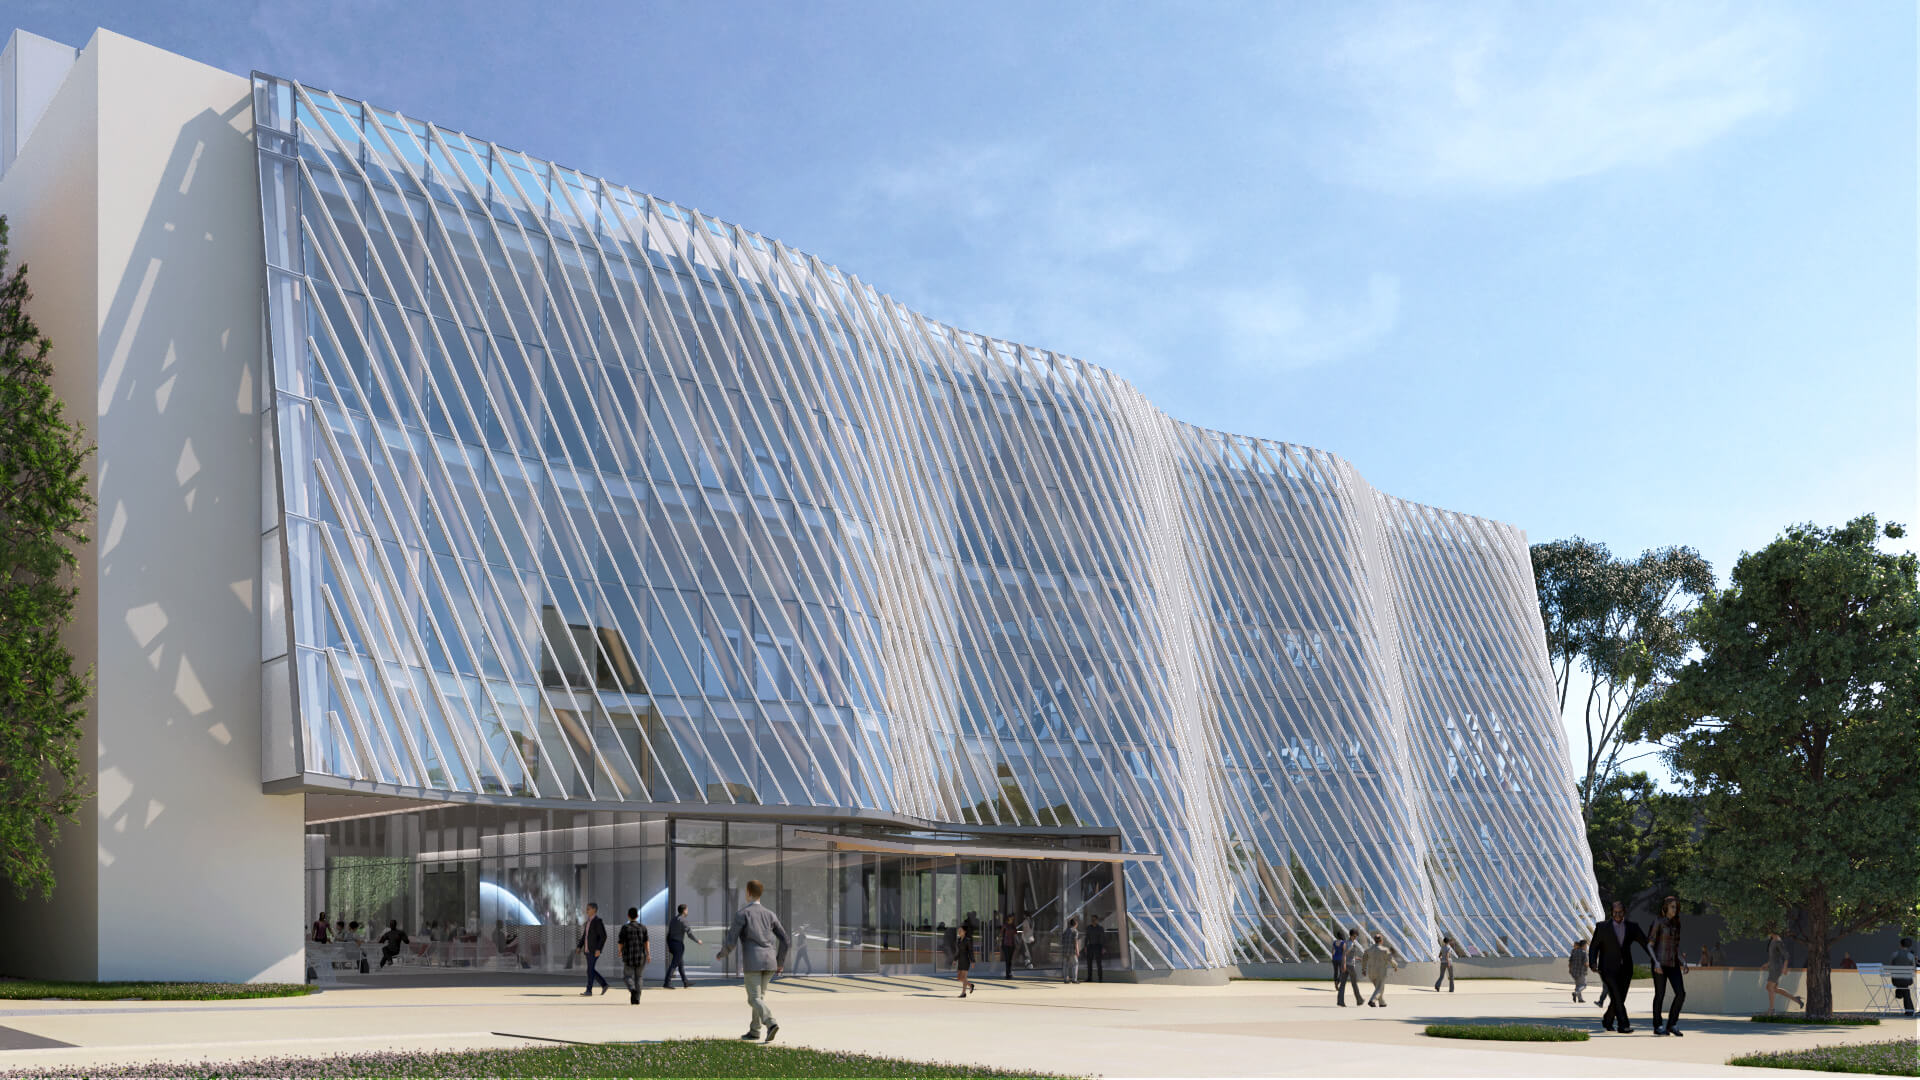 rendering of a glass curtain wall-wrapped building